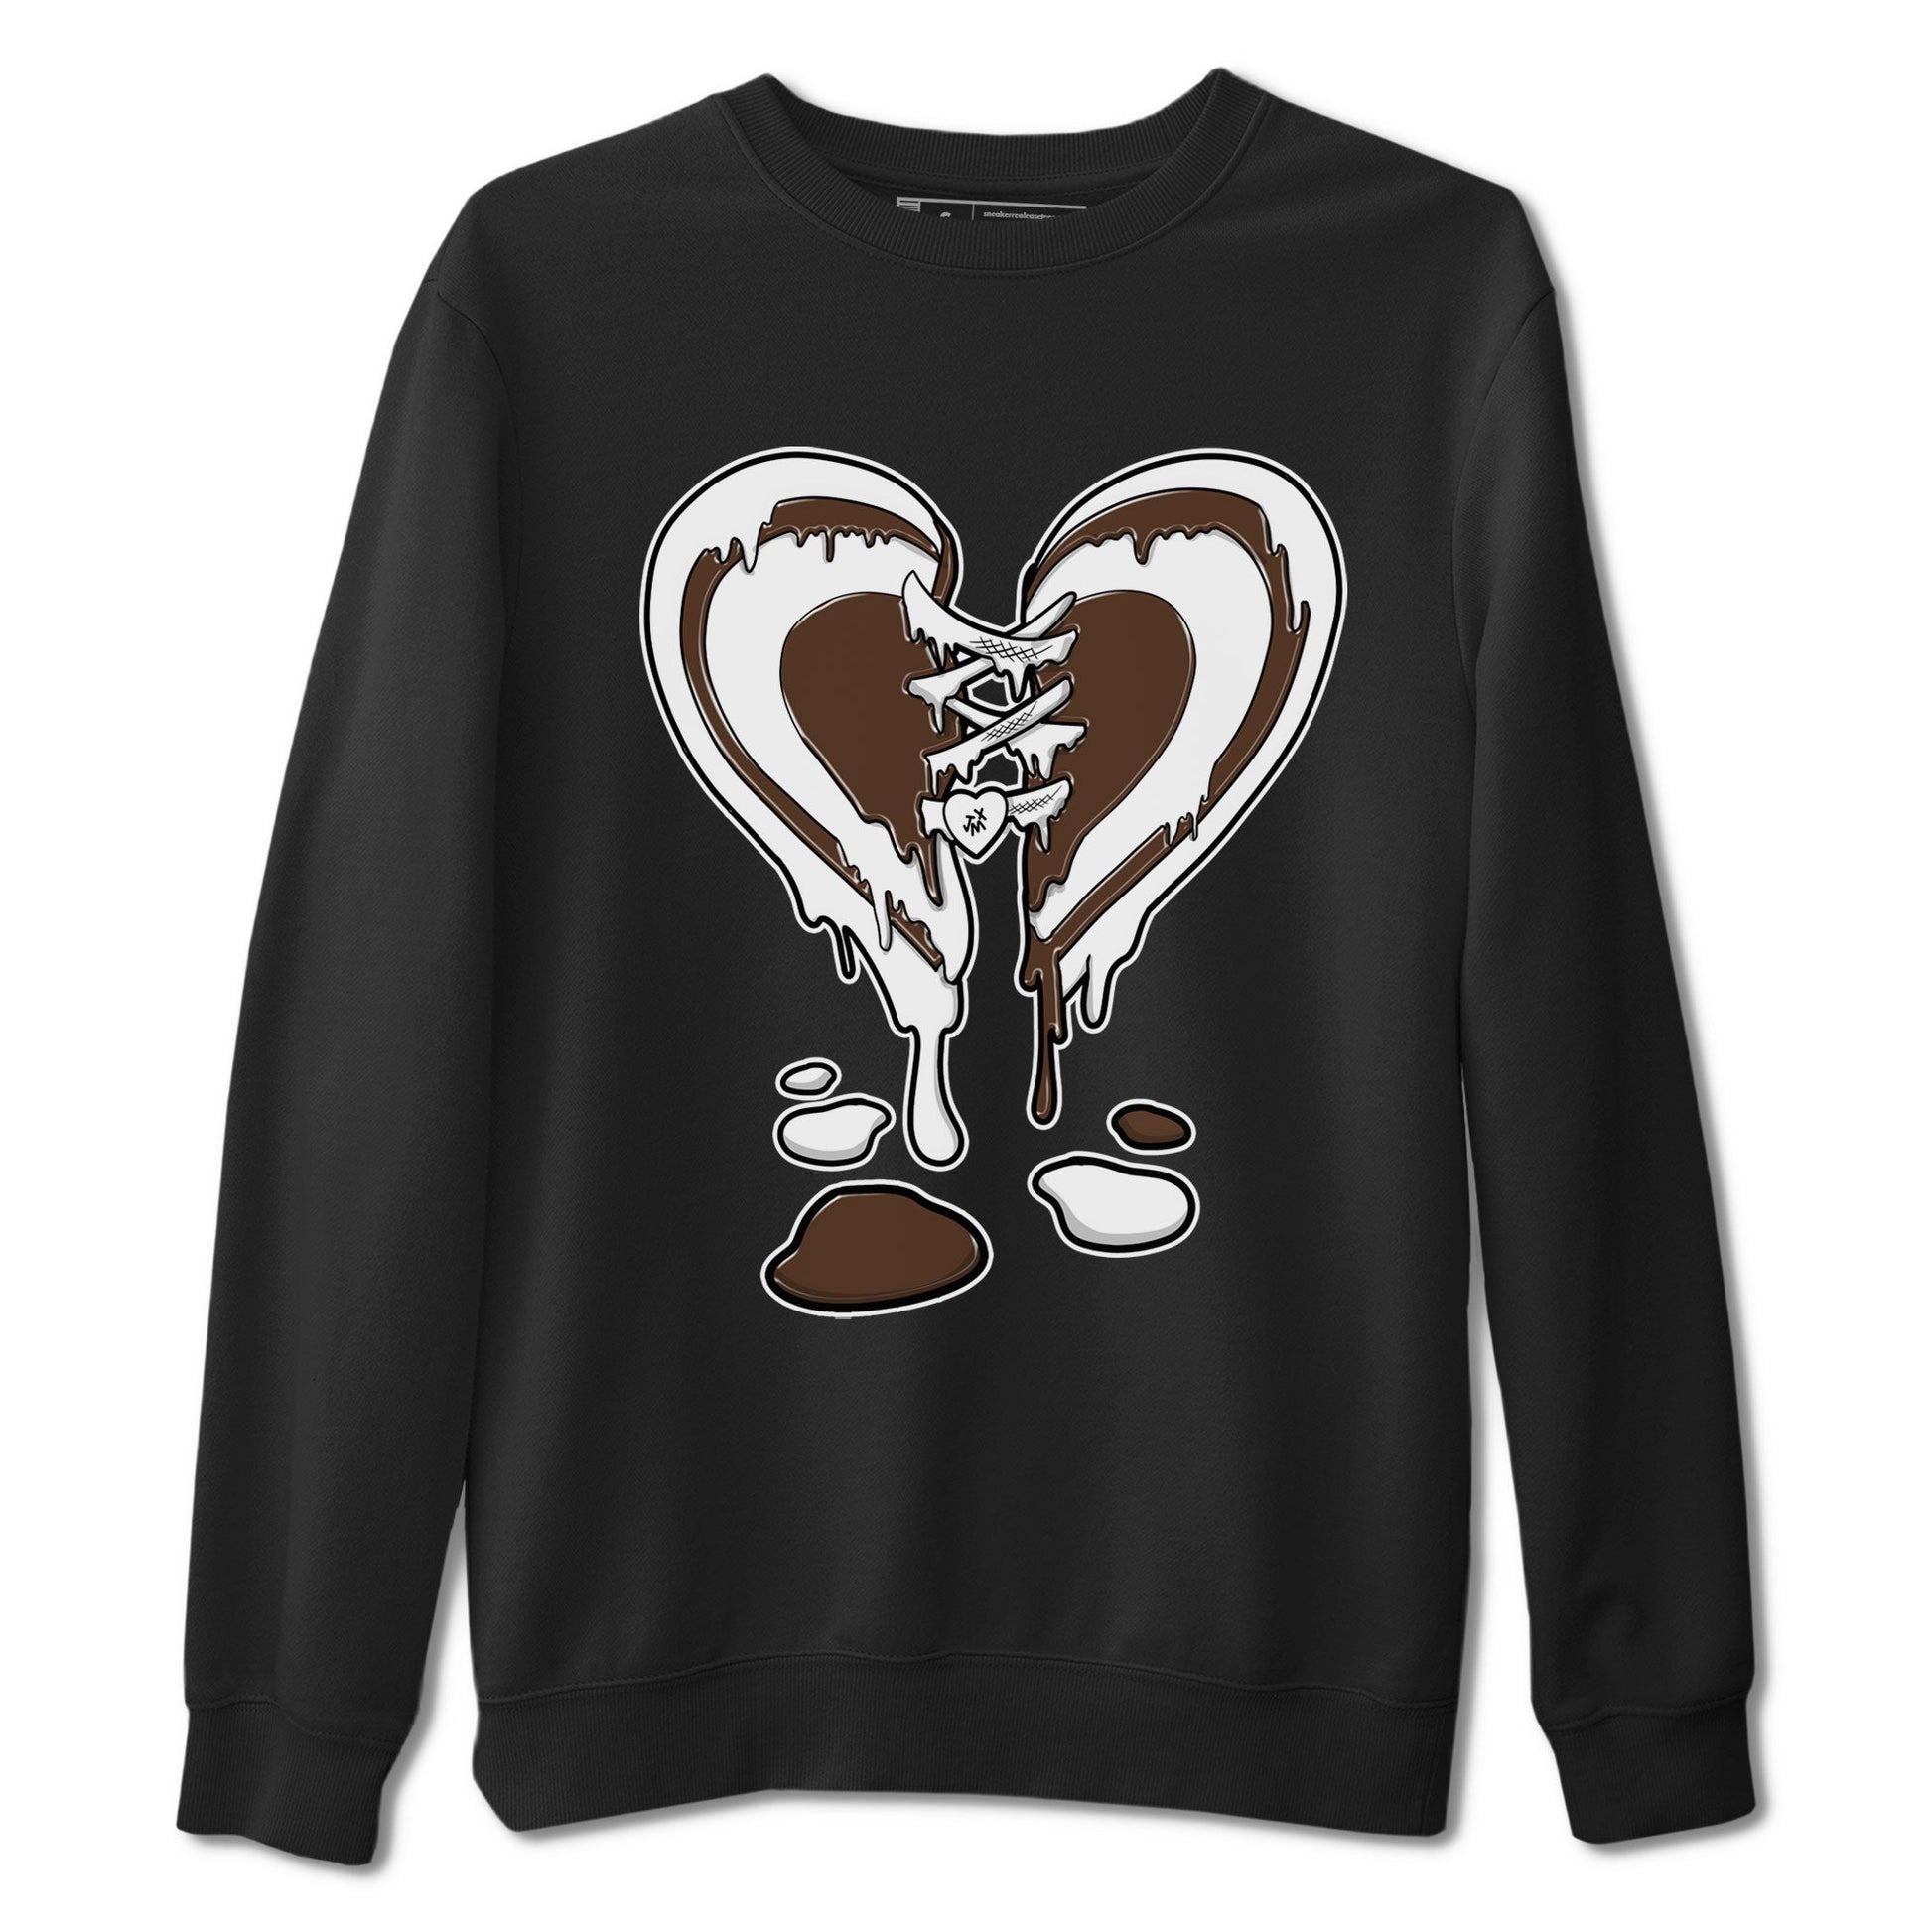 AF1 Chocolate shirt to match jordans Melting Heart sneaker tees Air Force 1 Chocolate SNRT Sneaker Release Tees Cotton Sneaker Tee Black 2 T-Shirt